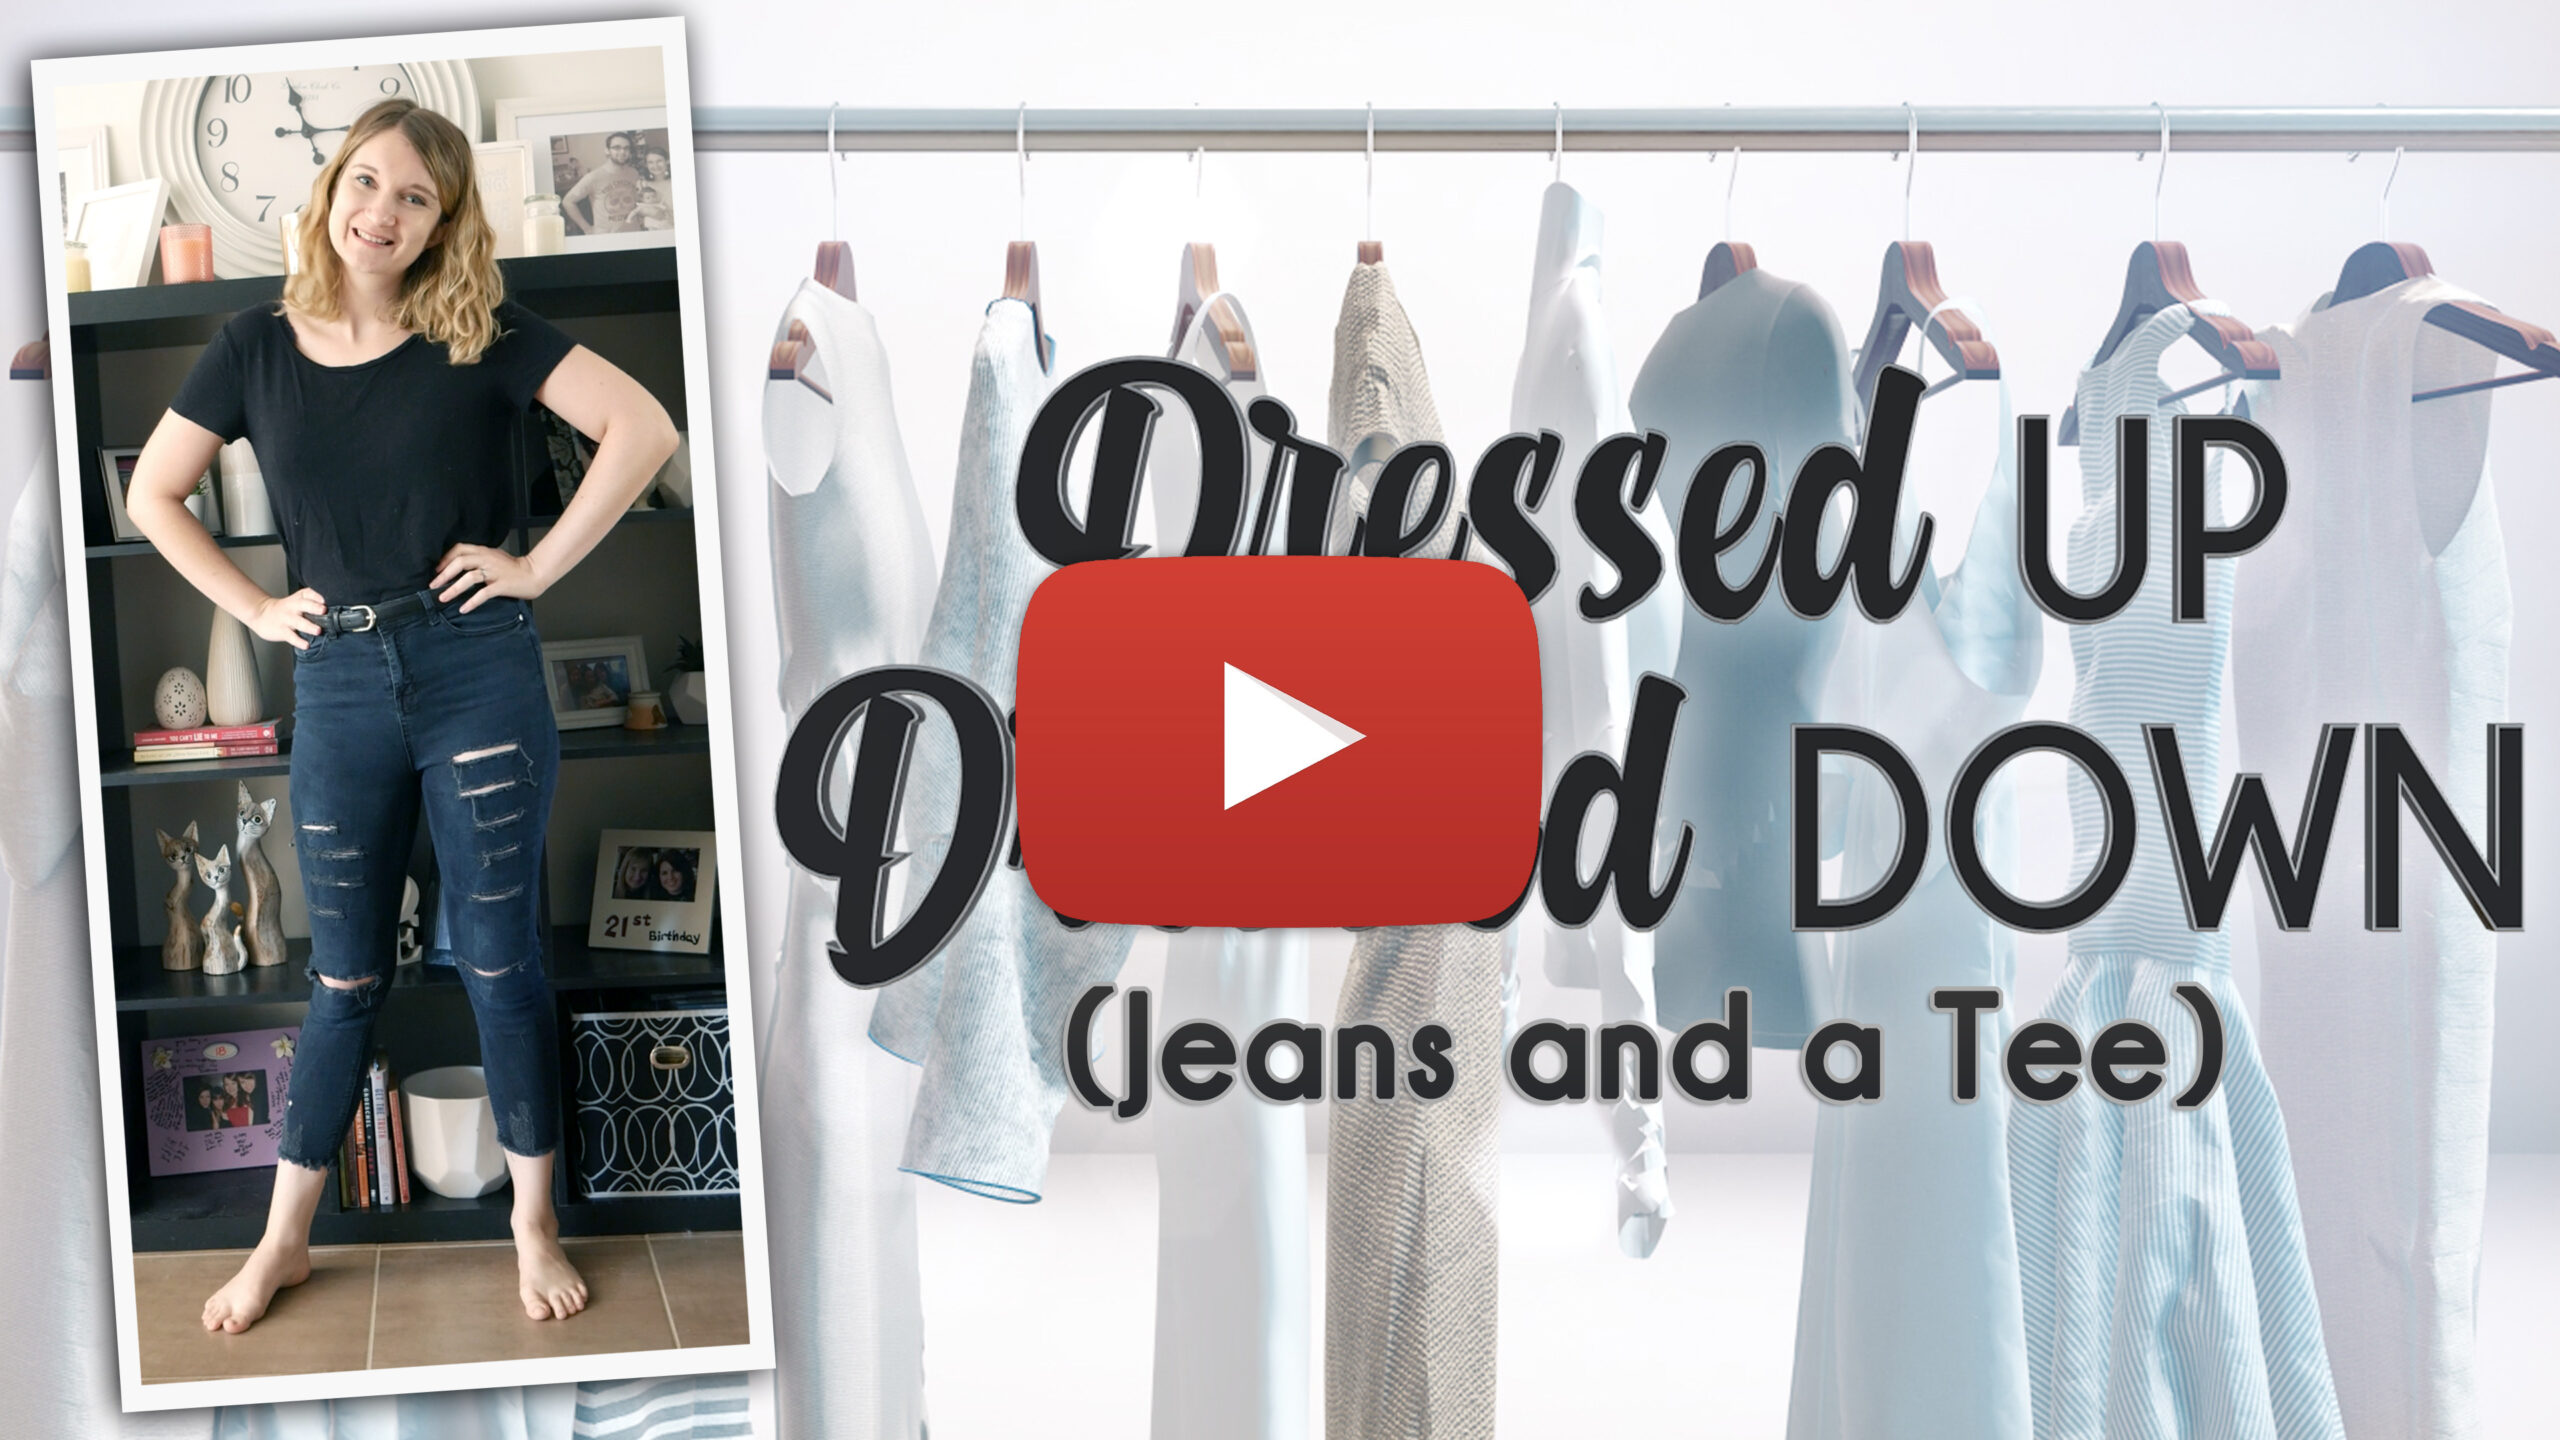 Dressed Up Dressed Down (Jeans and Tee) Youtube Thumbnail Play Button